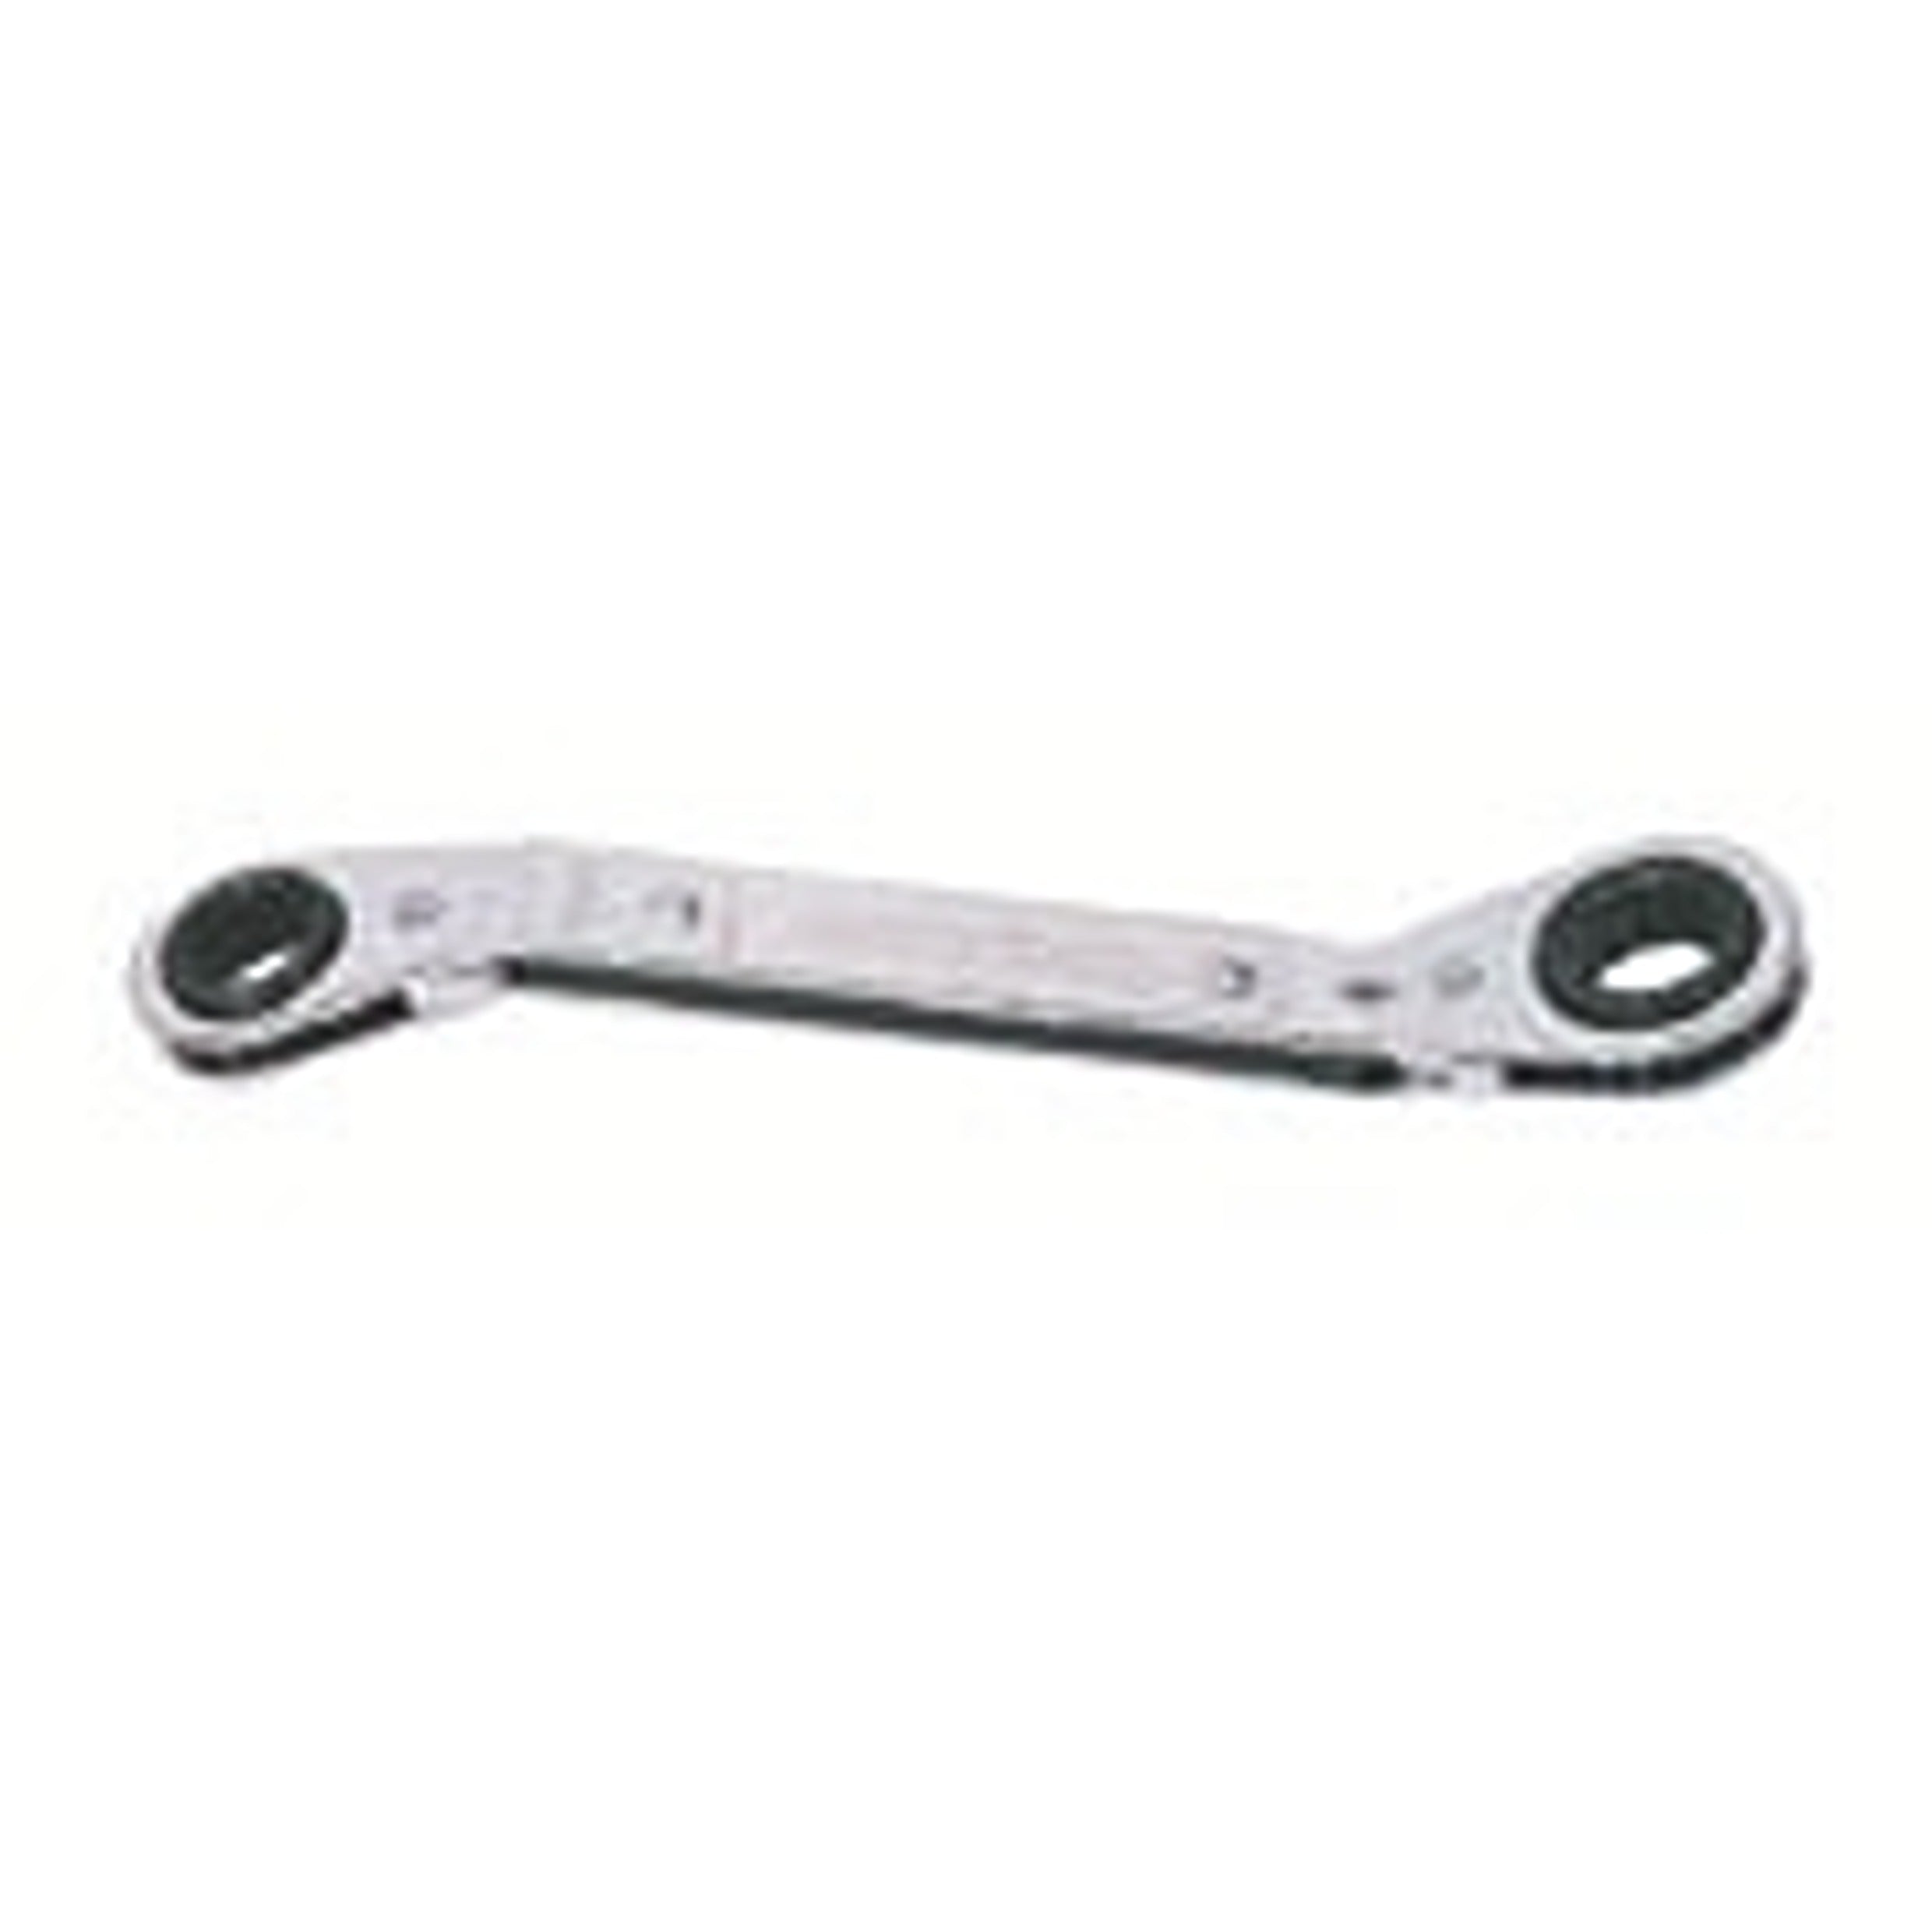 BRITOOL RBOM Offset Ring Ratchet Wrench - Metric (BRITOOL) - Premium Ring Ratchet Wrench from BRITOOL - Shop now at Yew Aik.